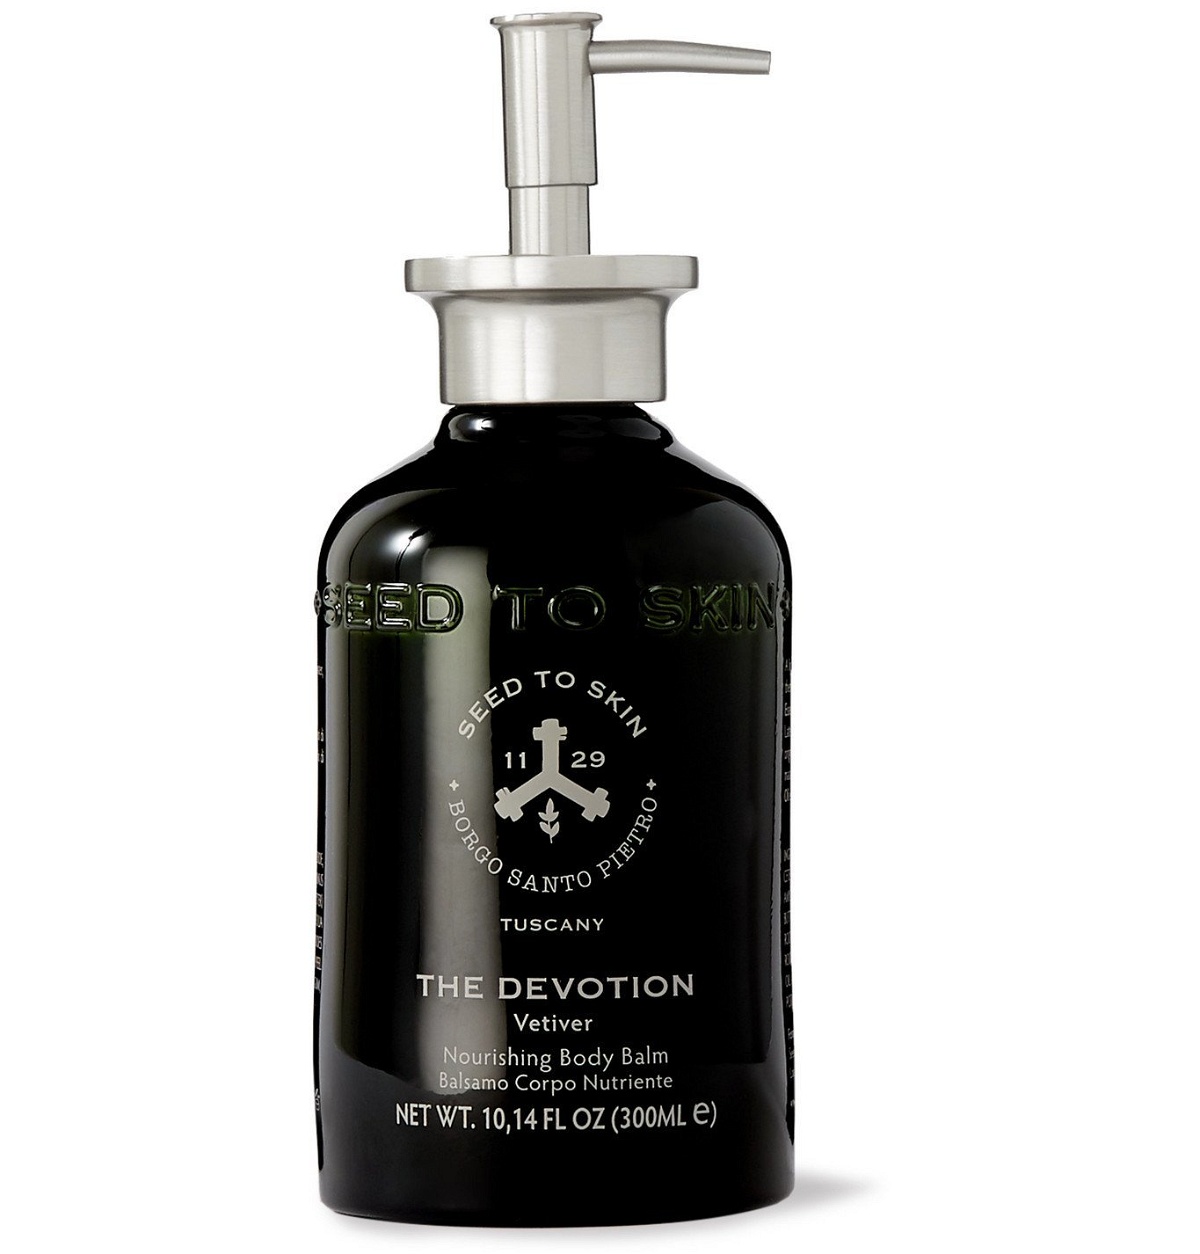 Photo: Seed to Skin - The Devotion Nourishing Body Balm, 300ml - Colorless